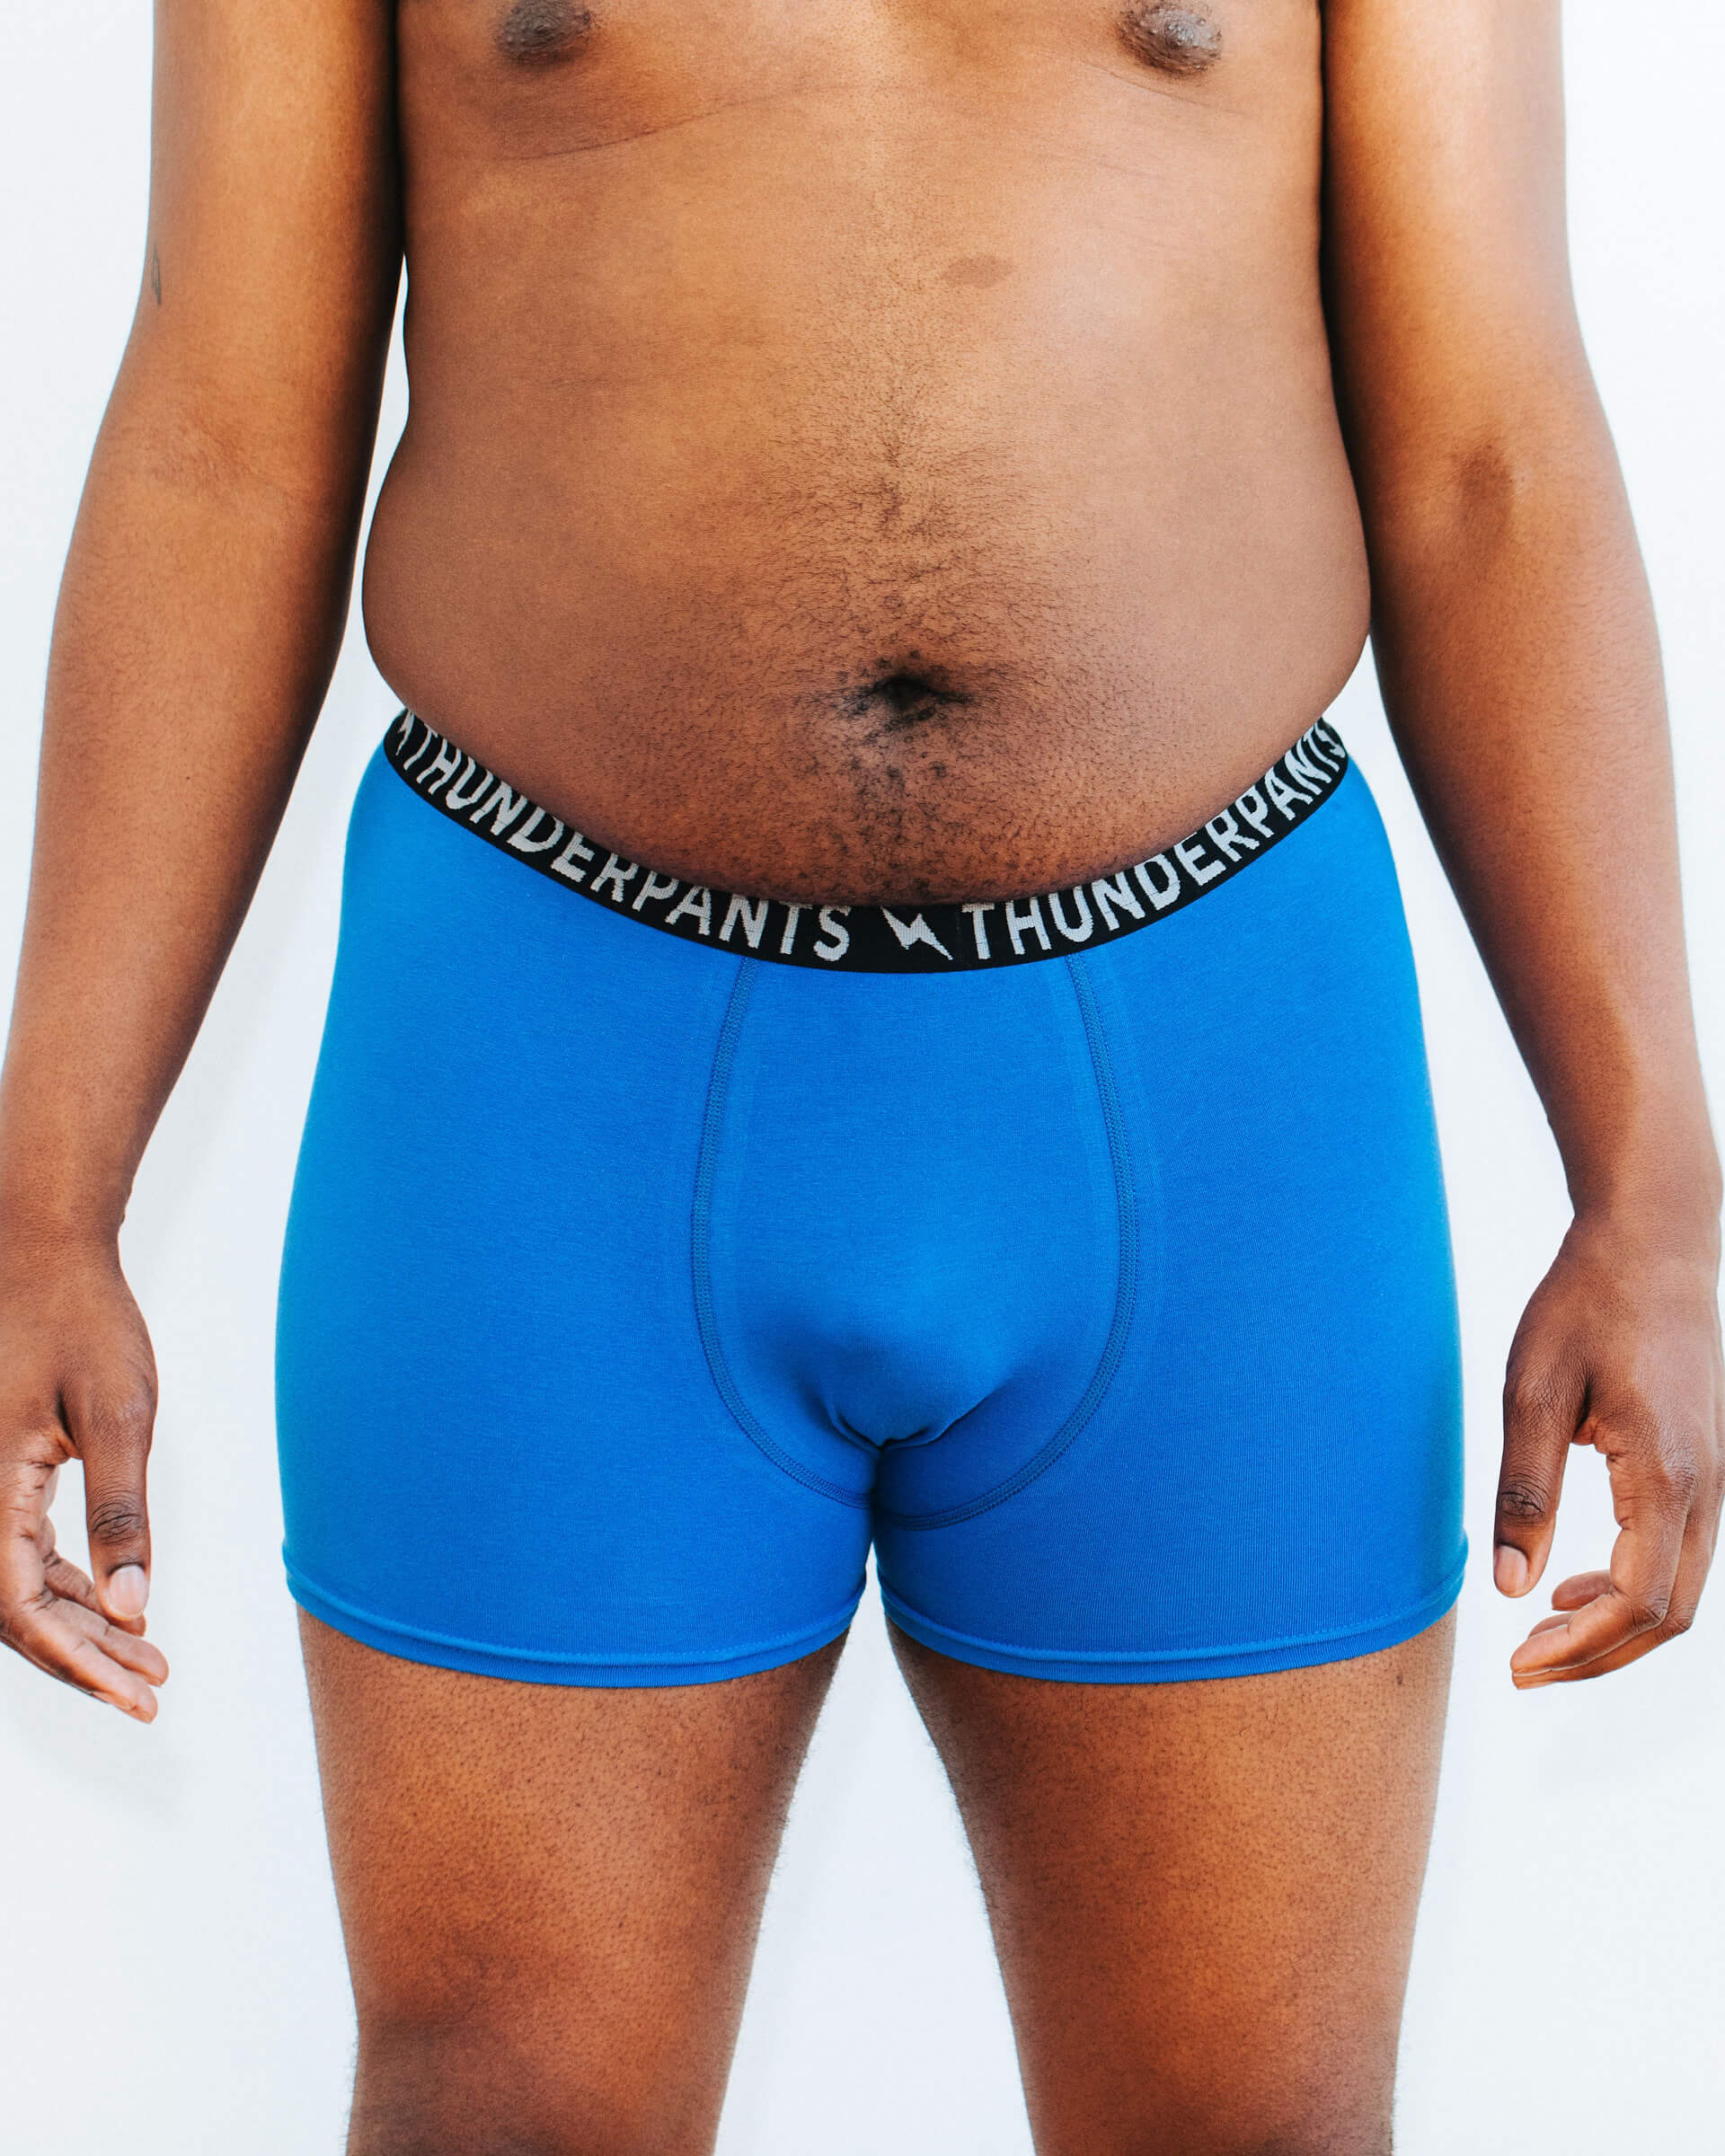 Front photo showing Thunderpants Organic Cotton Boxer Brief style underwear in Blueberry Blue on a model.